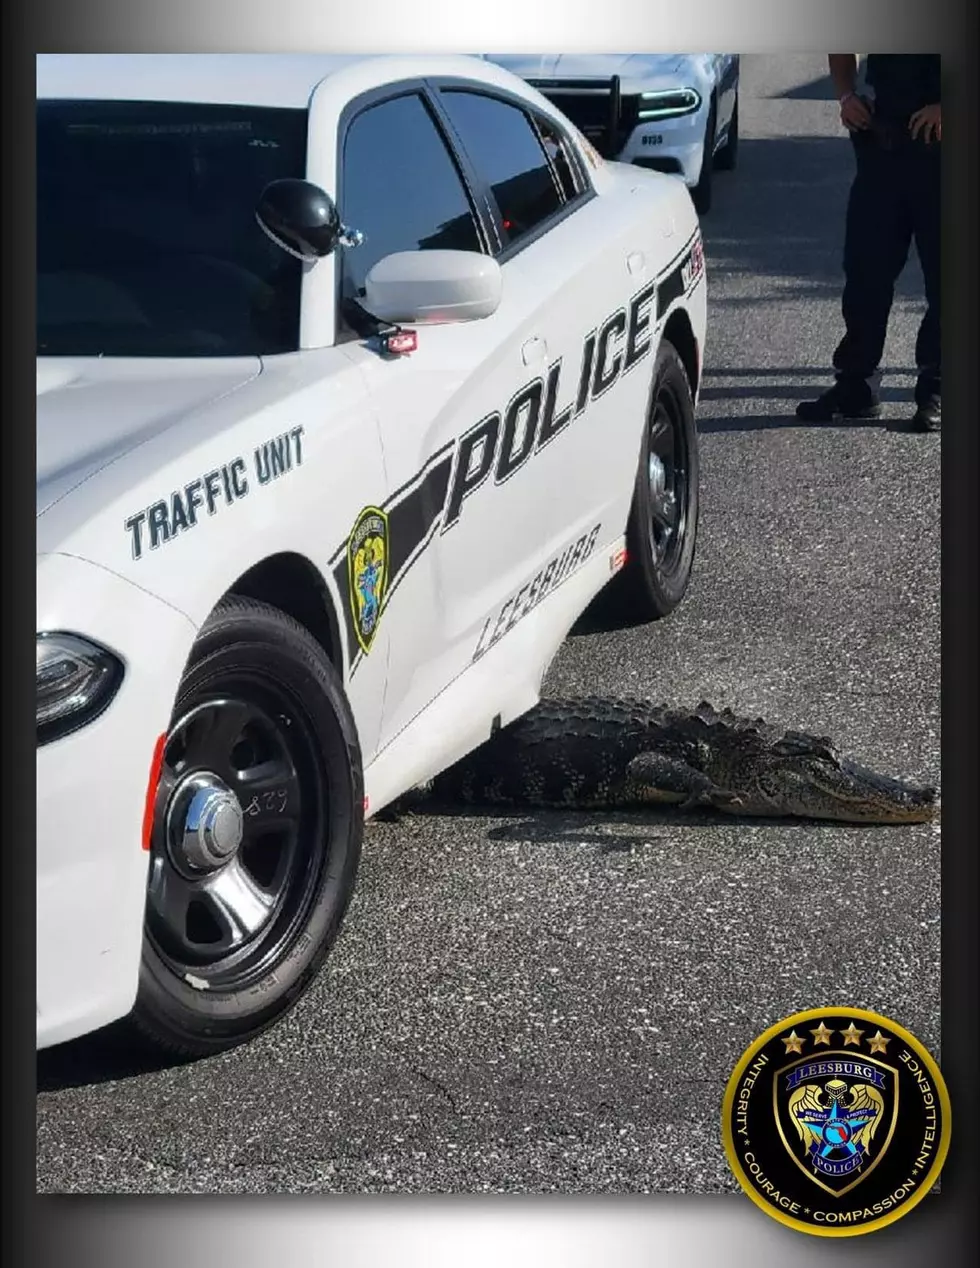 Alabama: Gator Charged With Resisting And Assault On An Officer